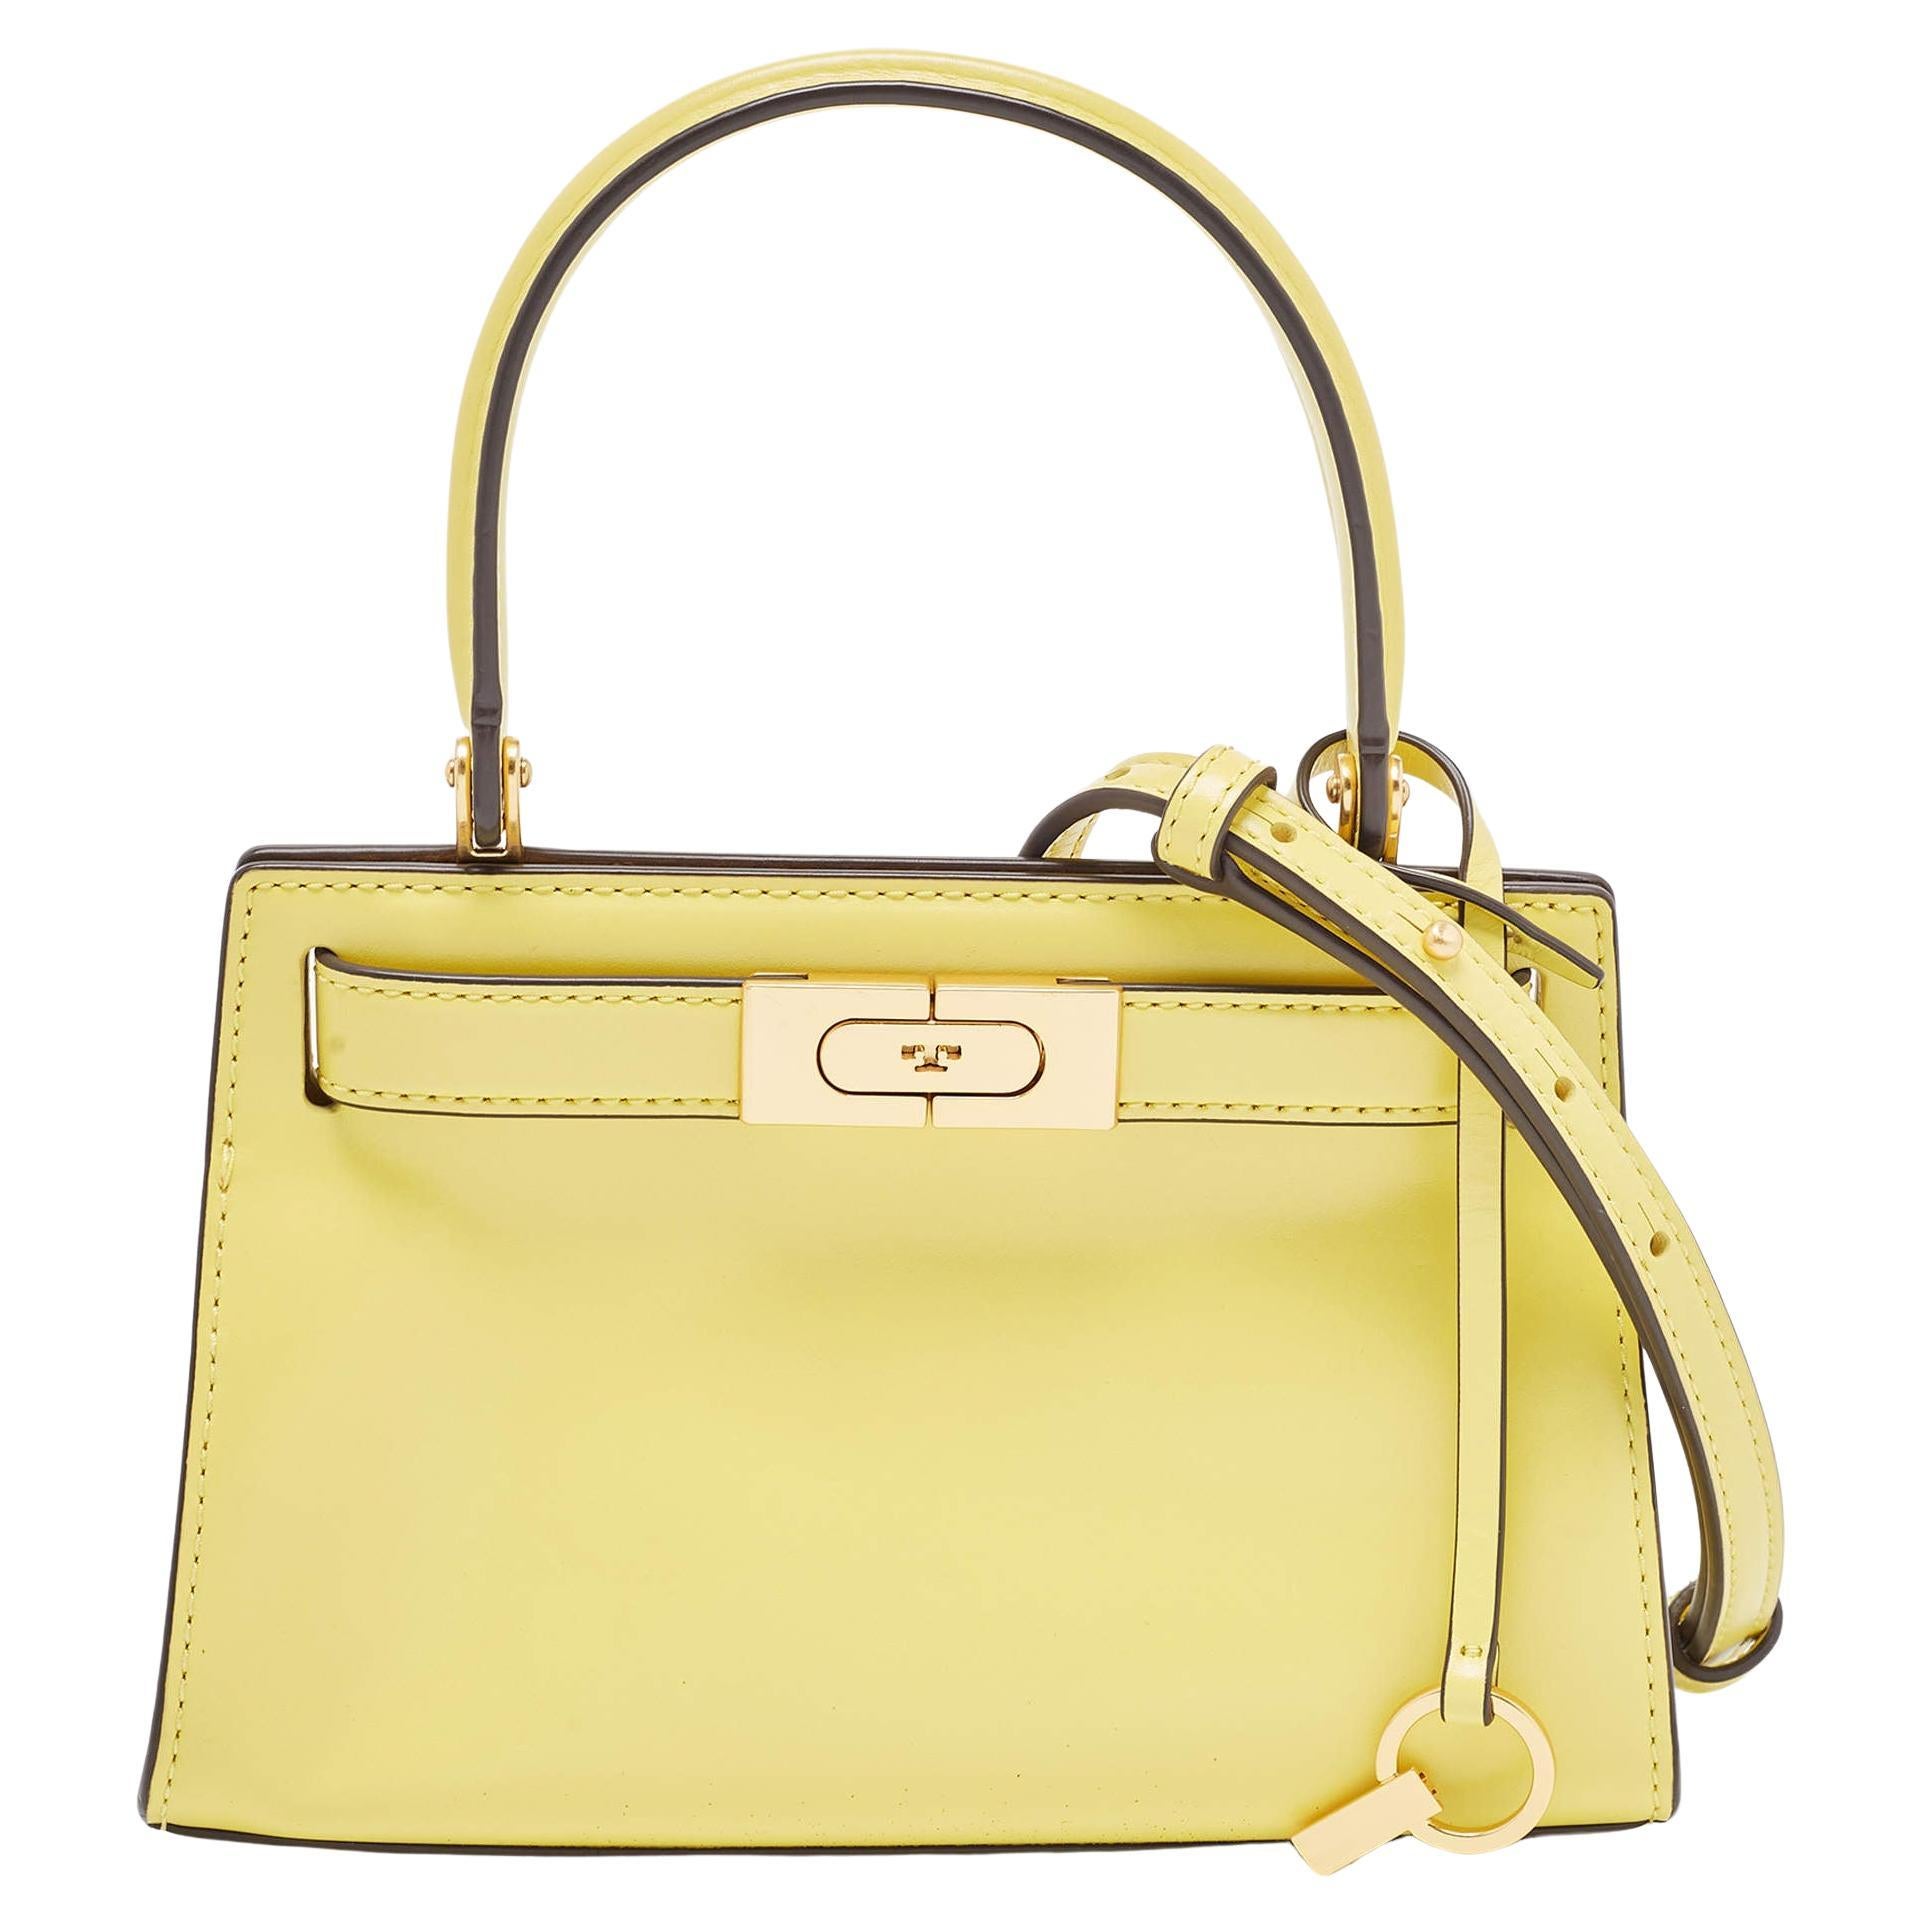 Tory Burch Yellow Leather Petite Lee Radziwill Top Handle Bag For Sale